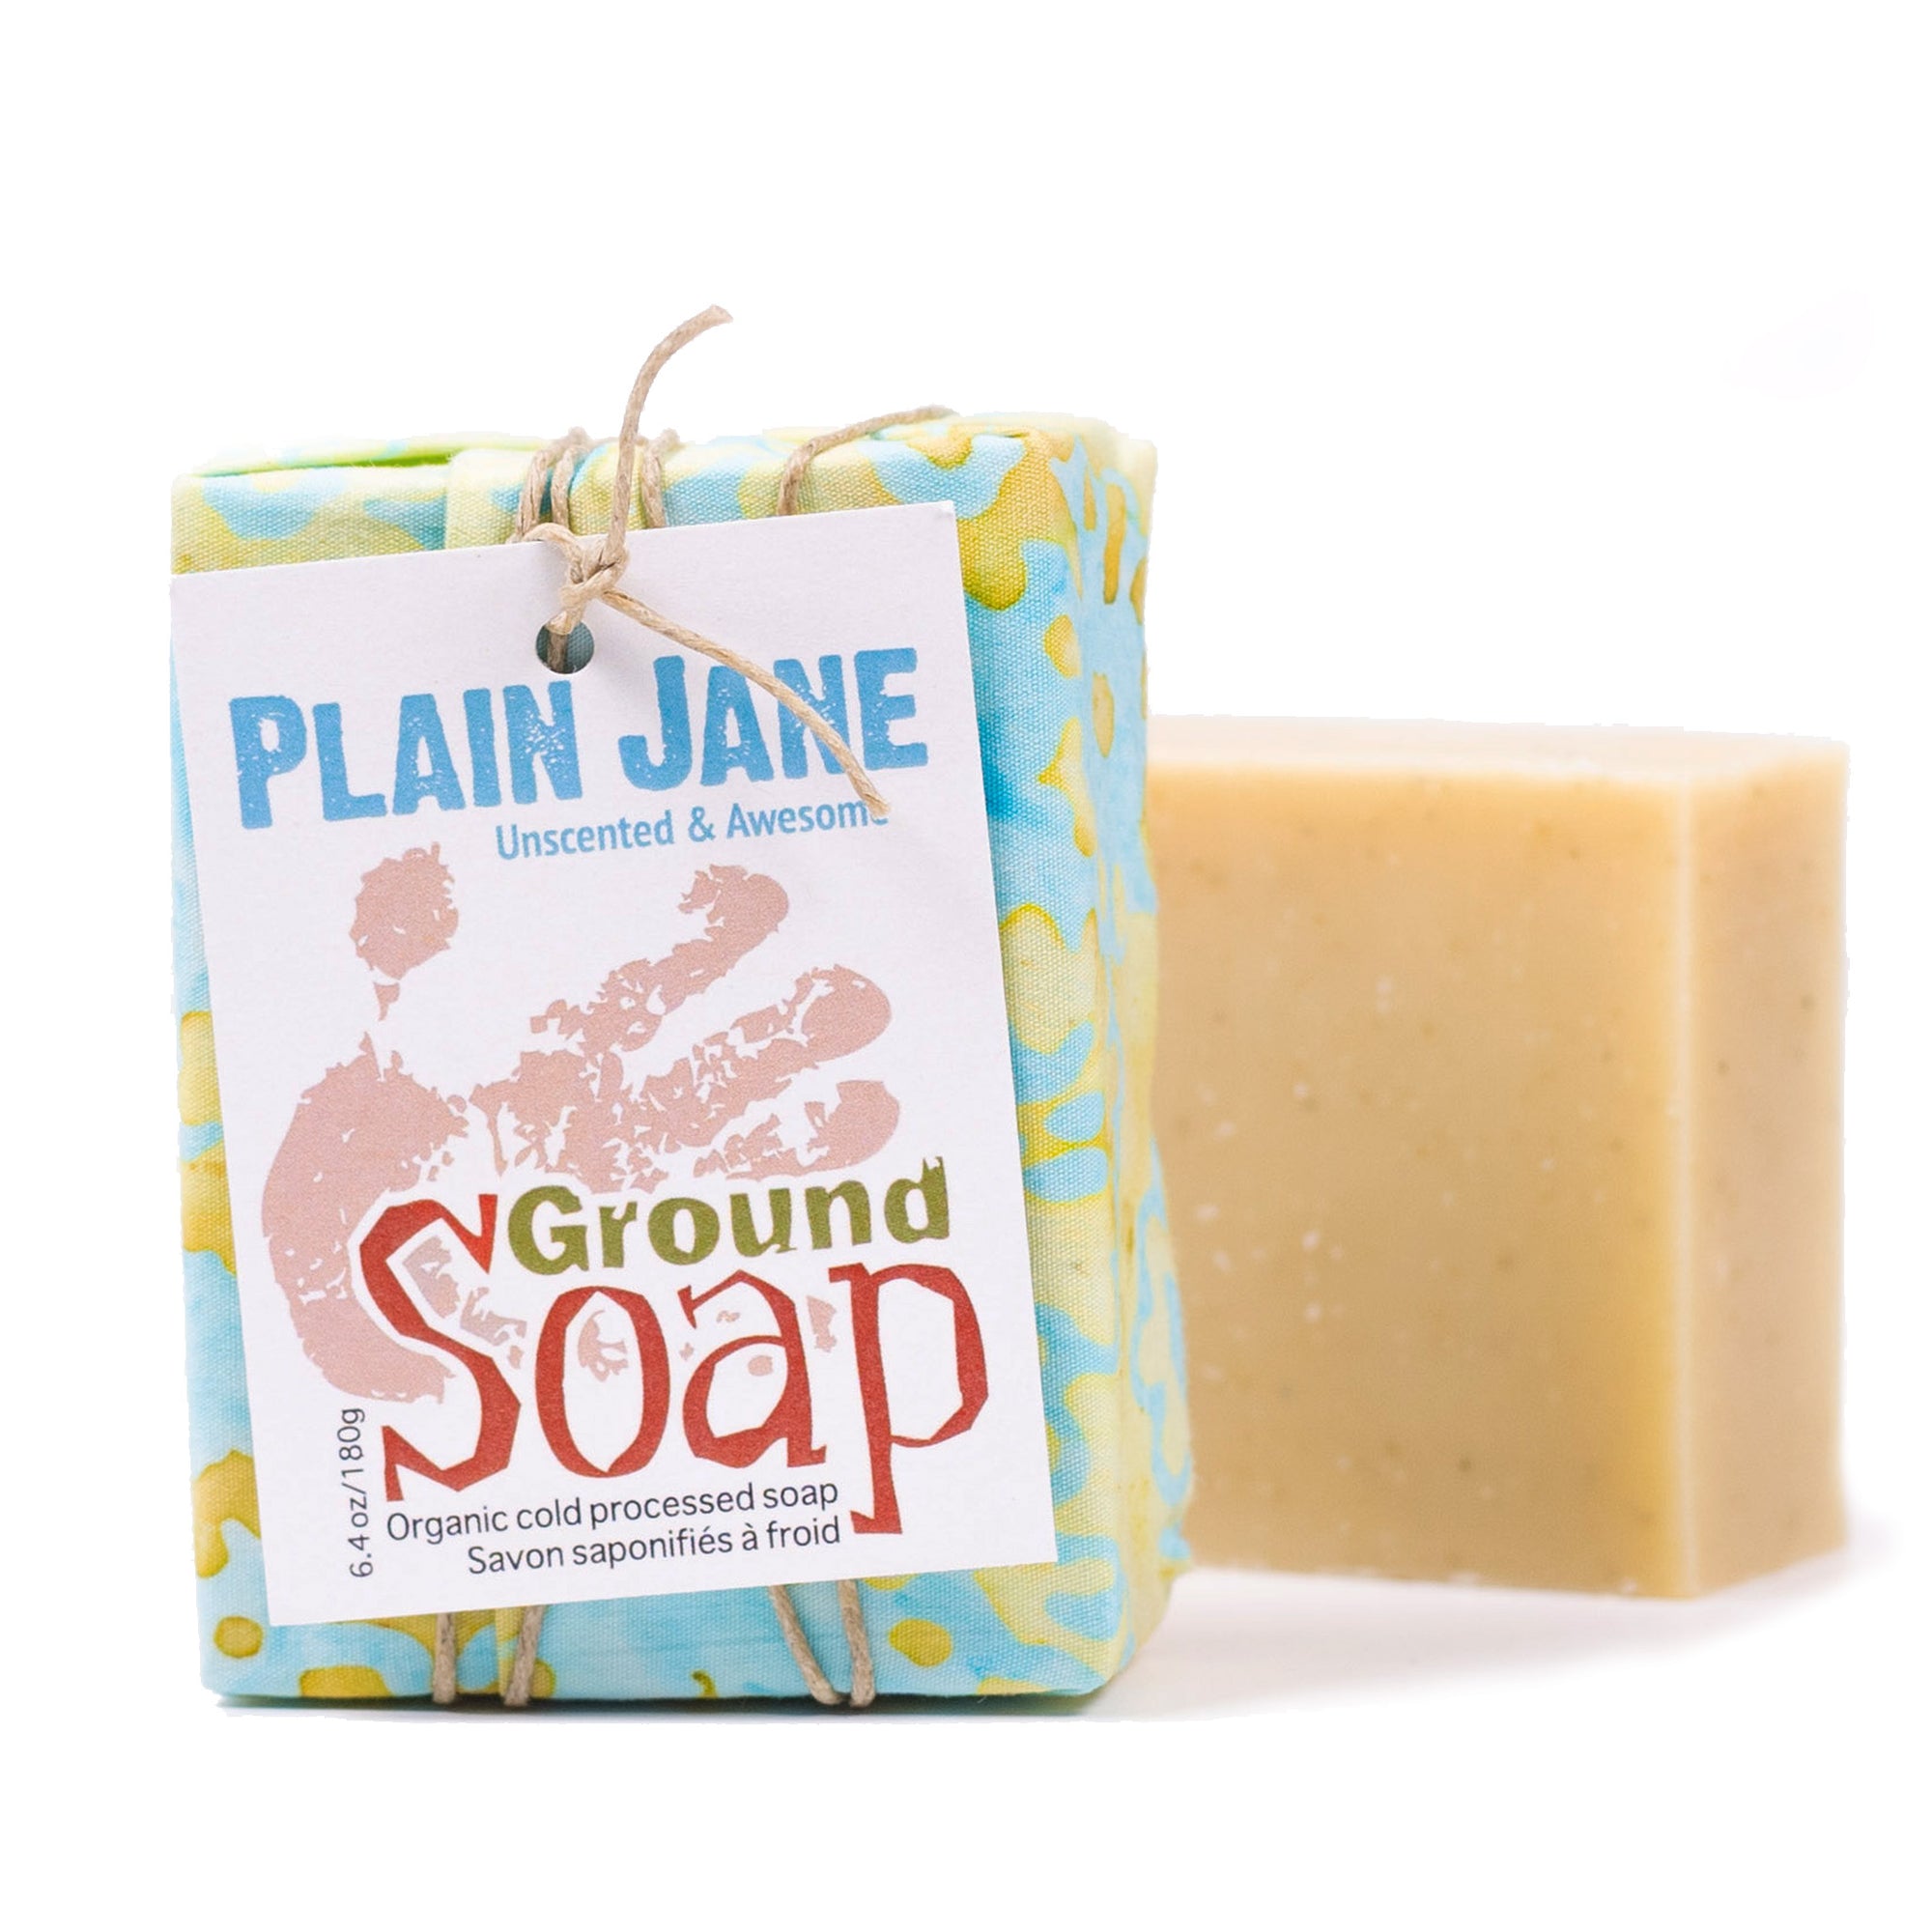 Plain Jane Unscented organic bar soap from ground Soap.